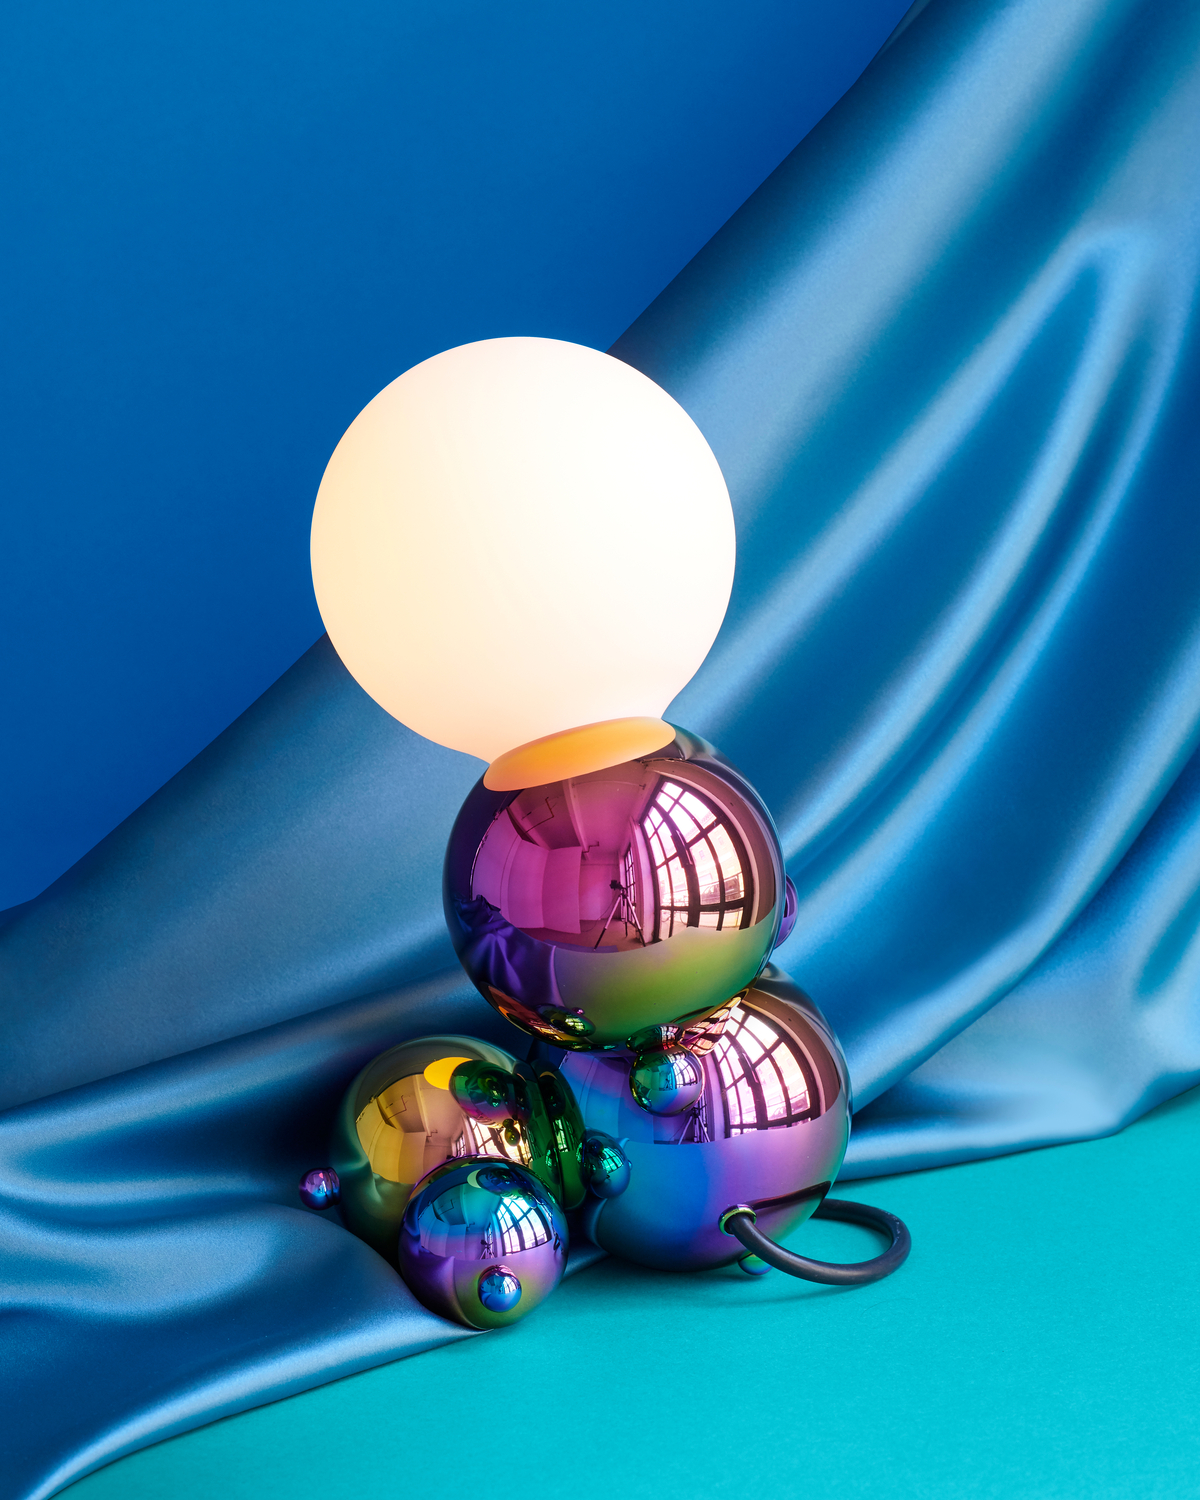 Rainbow colored spherical table lamp against a blue background